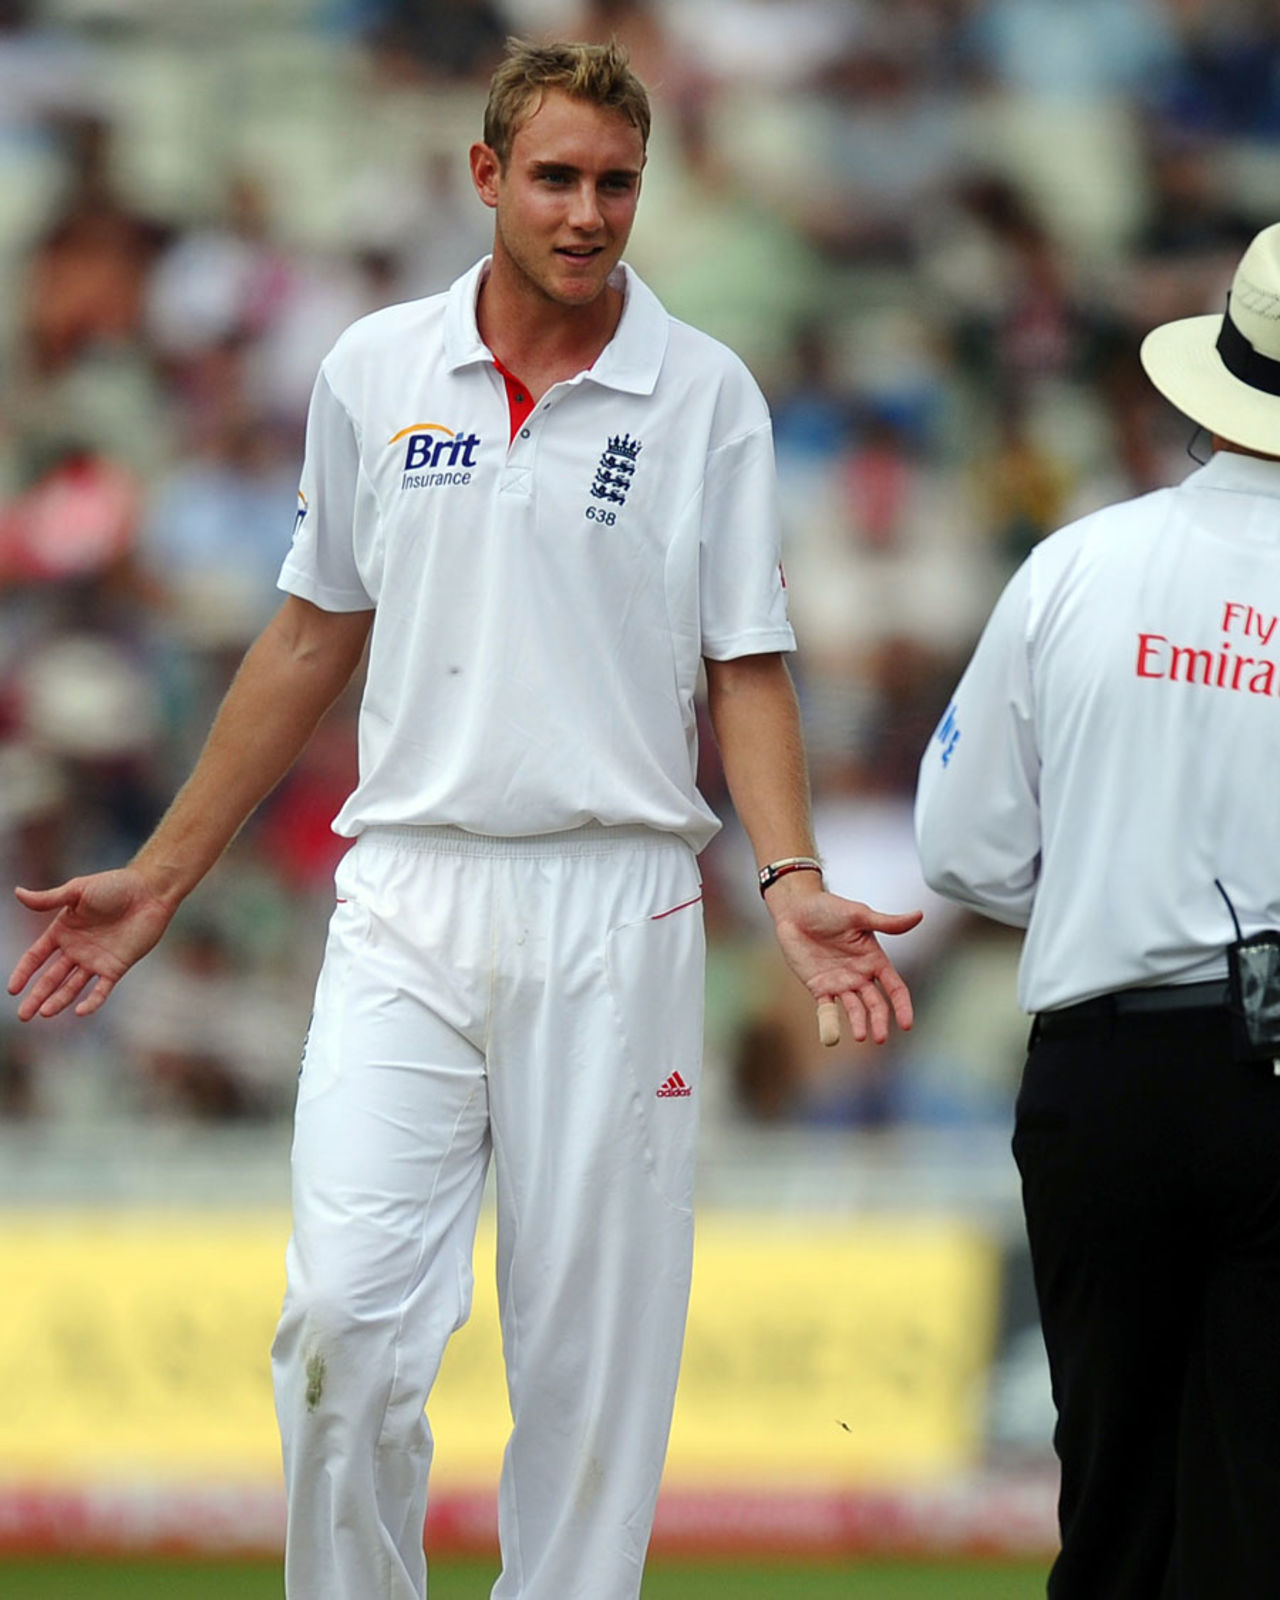 Stuart Broad remonstrates with the umpire after a caught-behind appeal was turned down, England v Pakistan, 2nd Test, Edgbaston, August 8, 2010